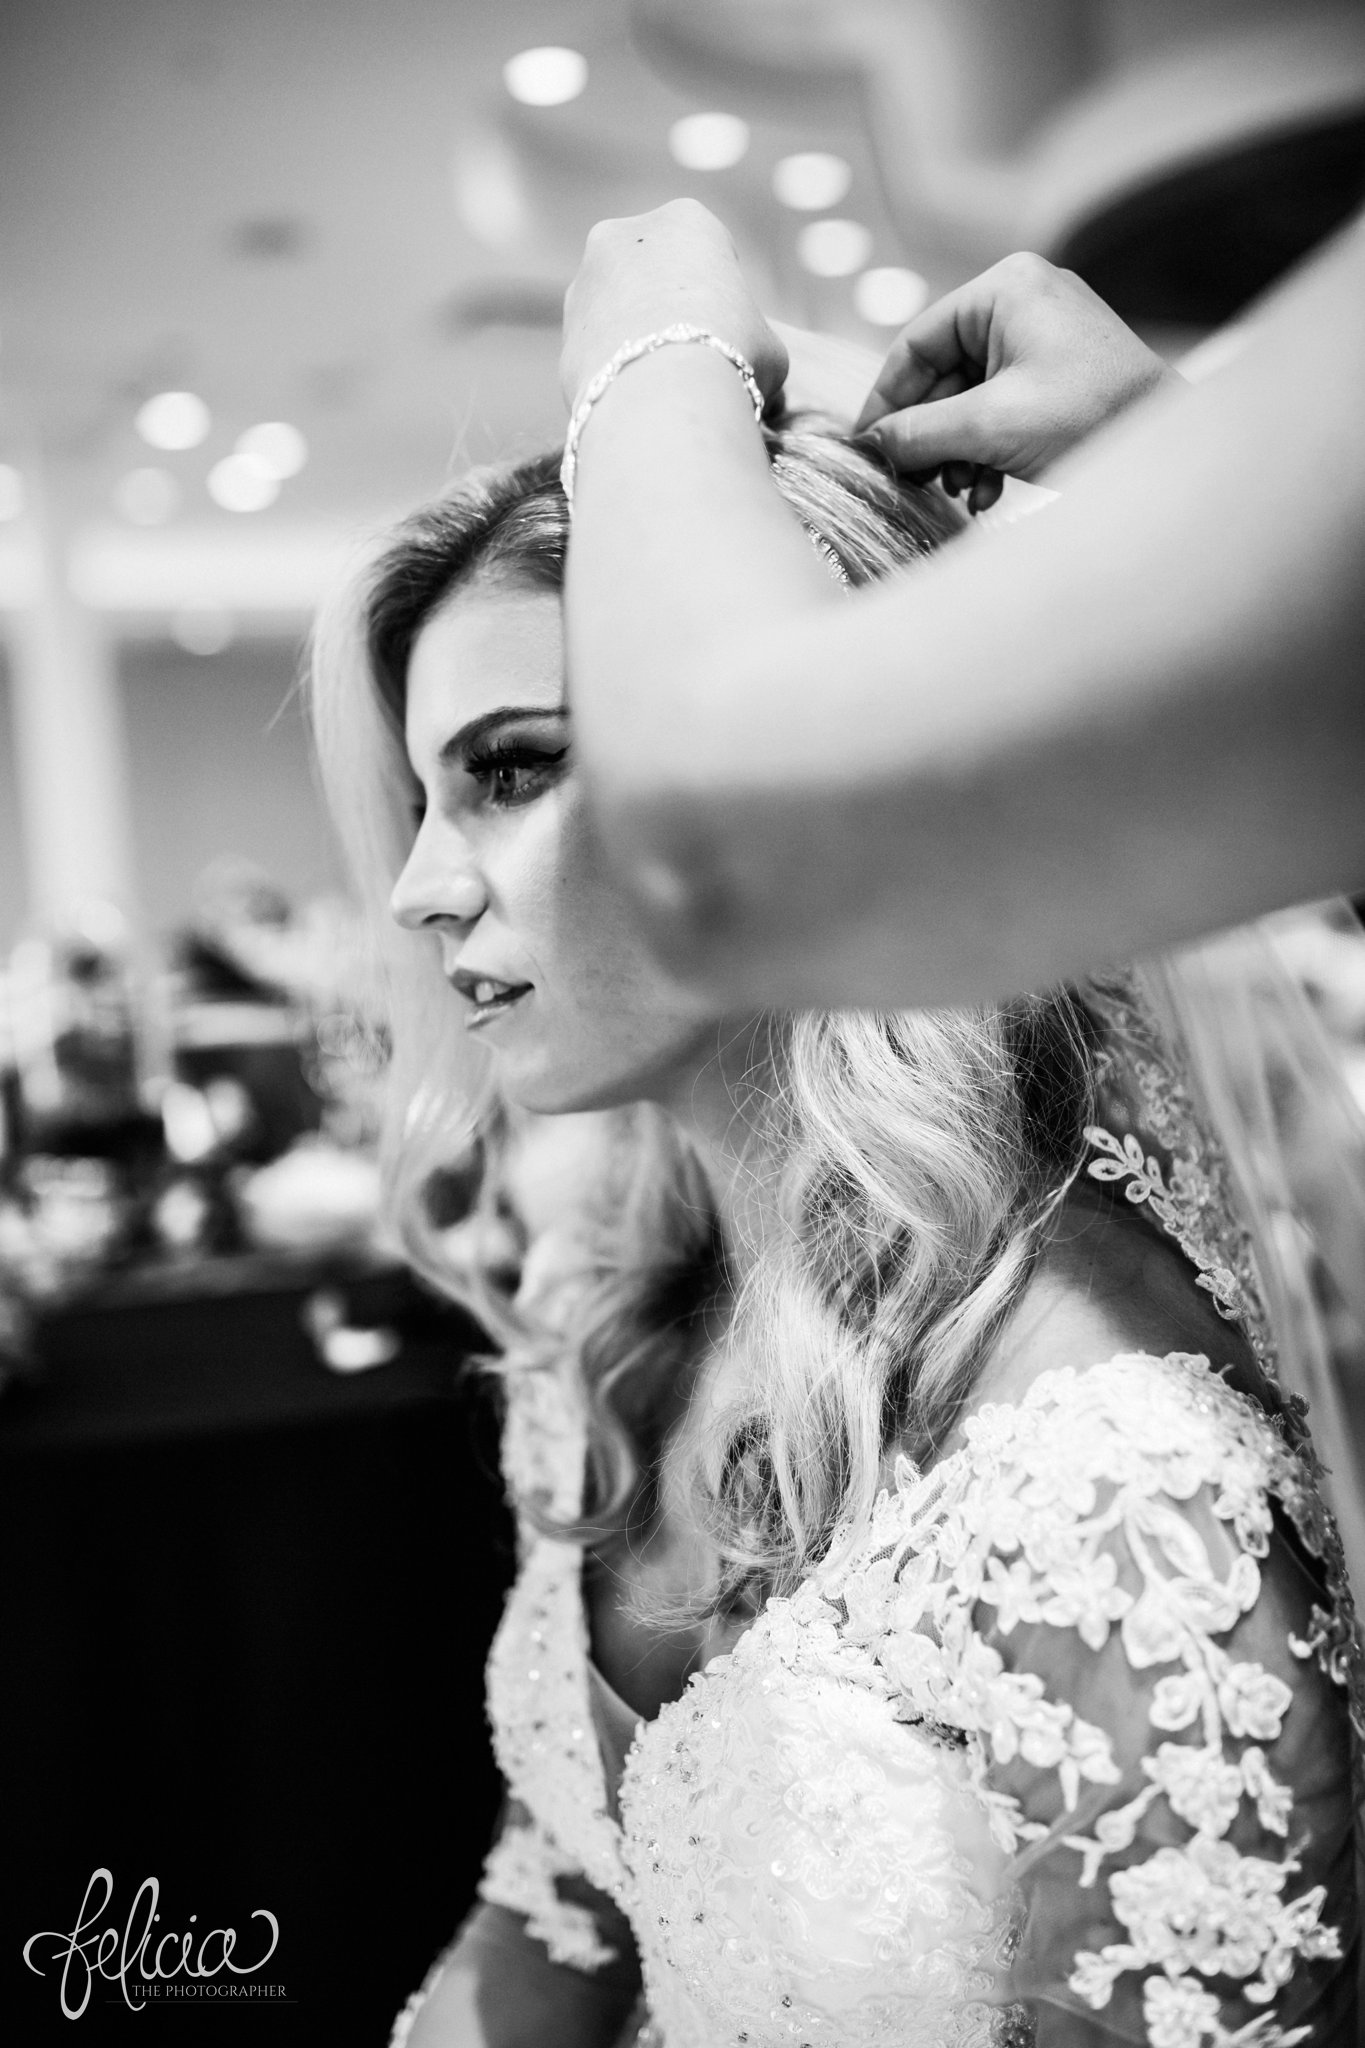 images by feliciathephotographer.com | wedding photographer | kansas city | redemptorist | classic | black and white | getting ready | pre-ceremony | lace dress | whimsical | paradise hair and makeup | bride | 